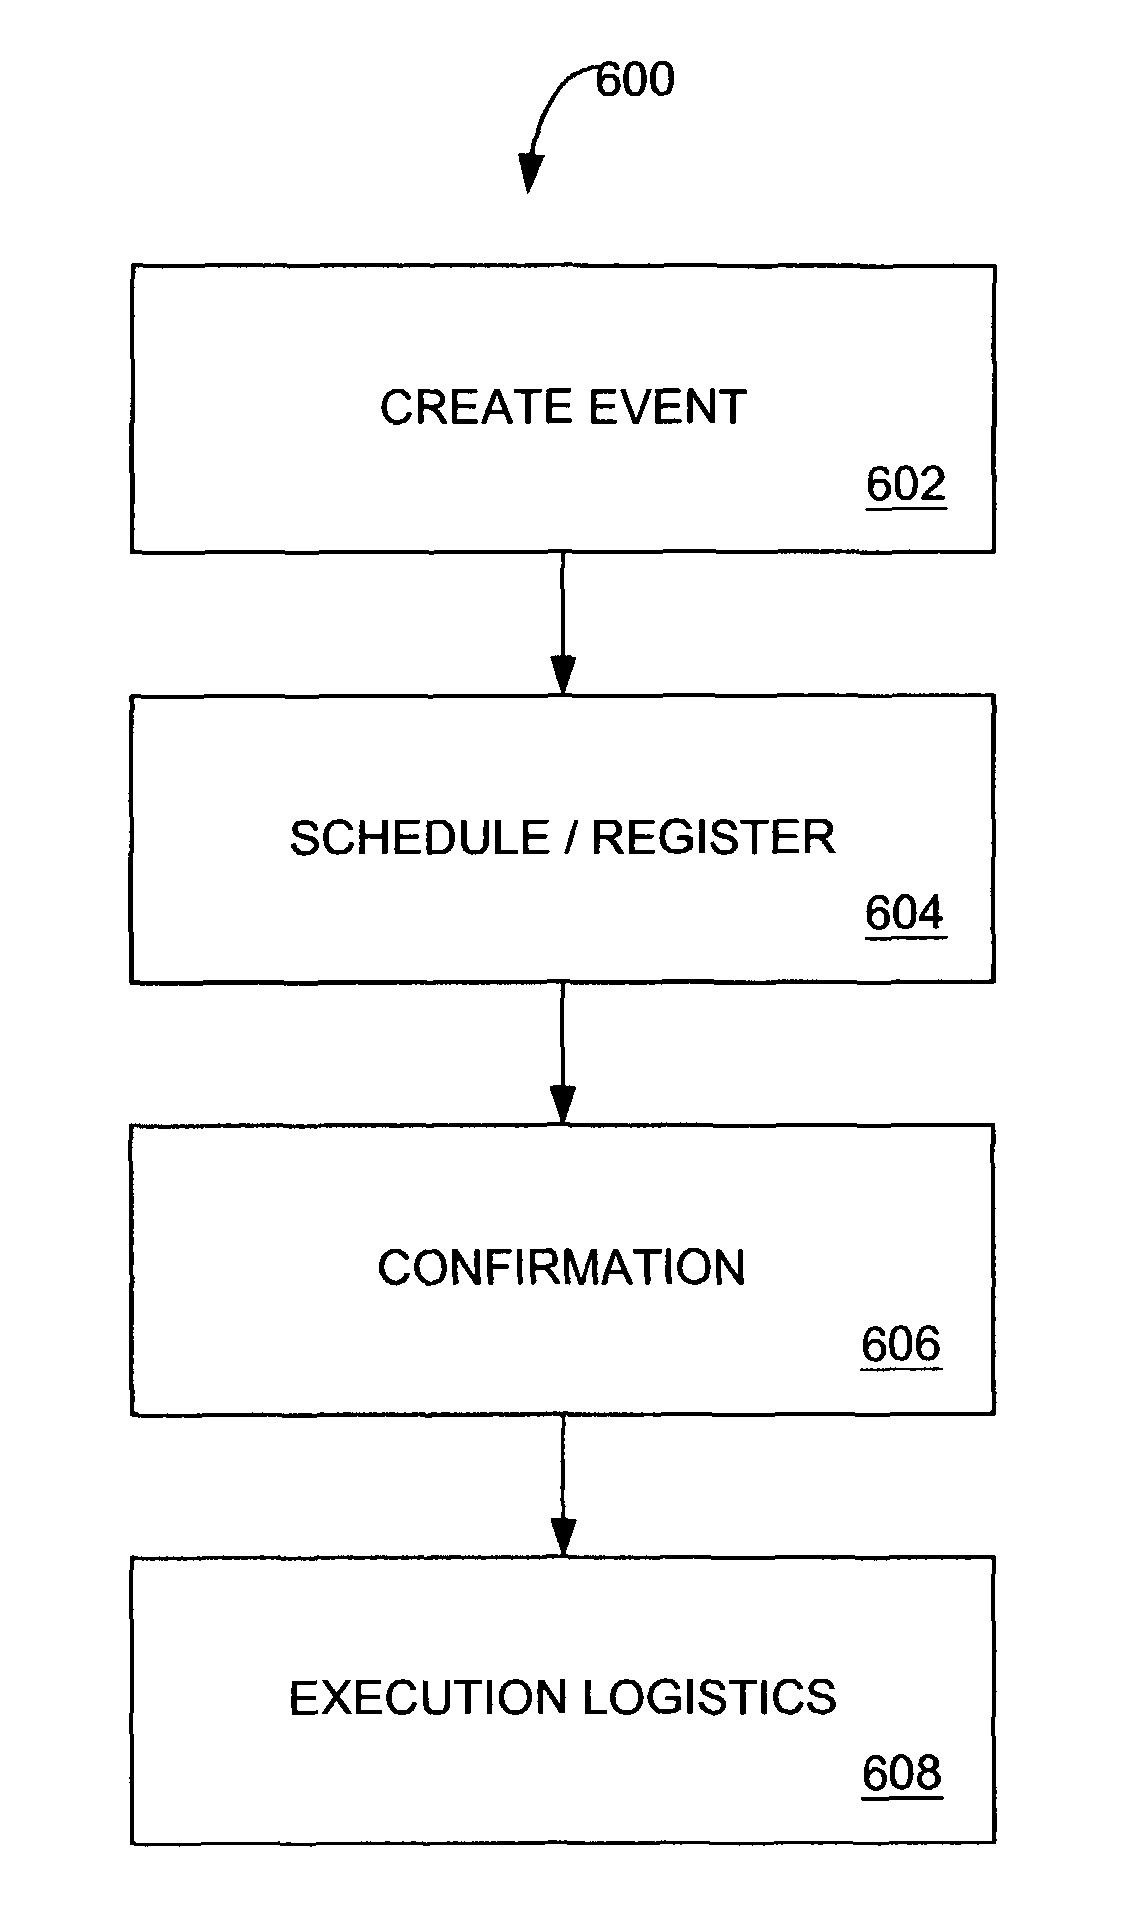 Apparatus, methods, and articles of manufacture for constructing and maintaining a calendaring interface